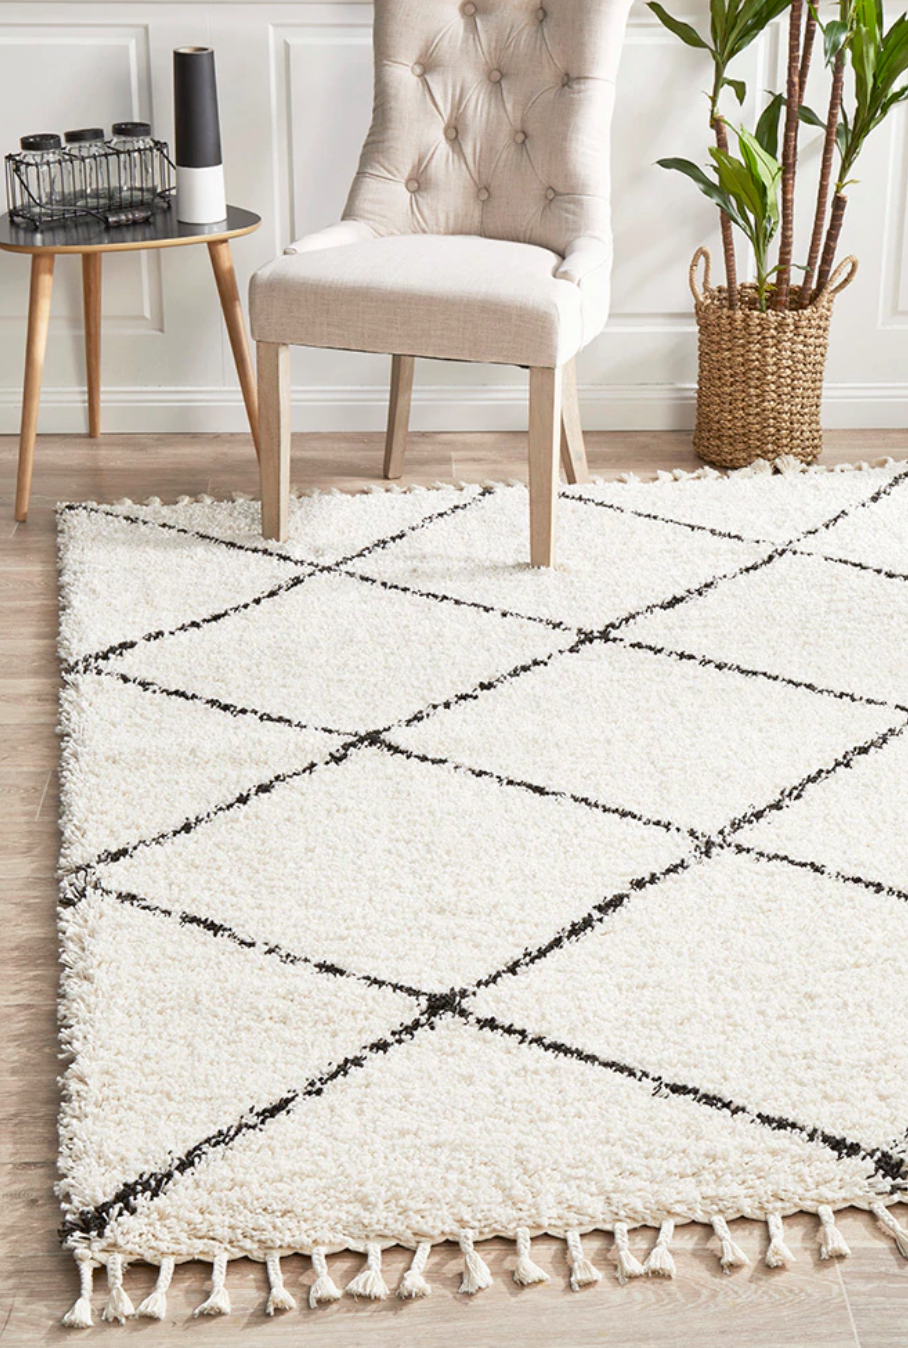 Designer Rugs to Make Your Rooms Complete